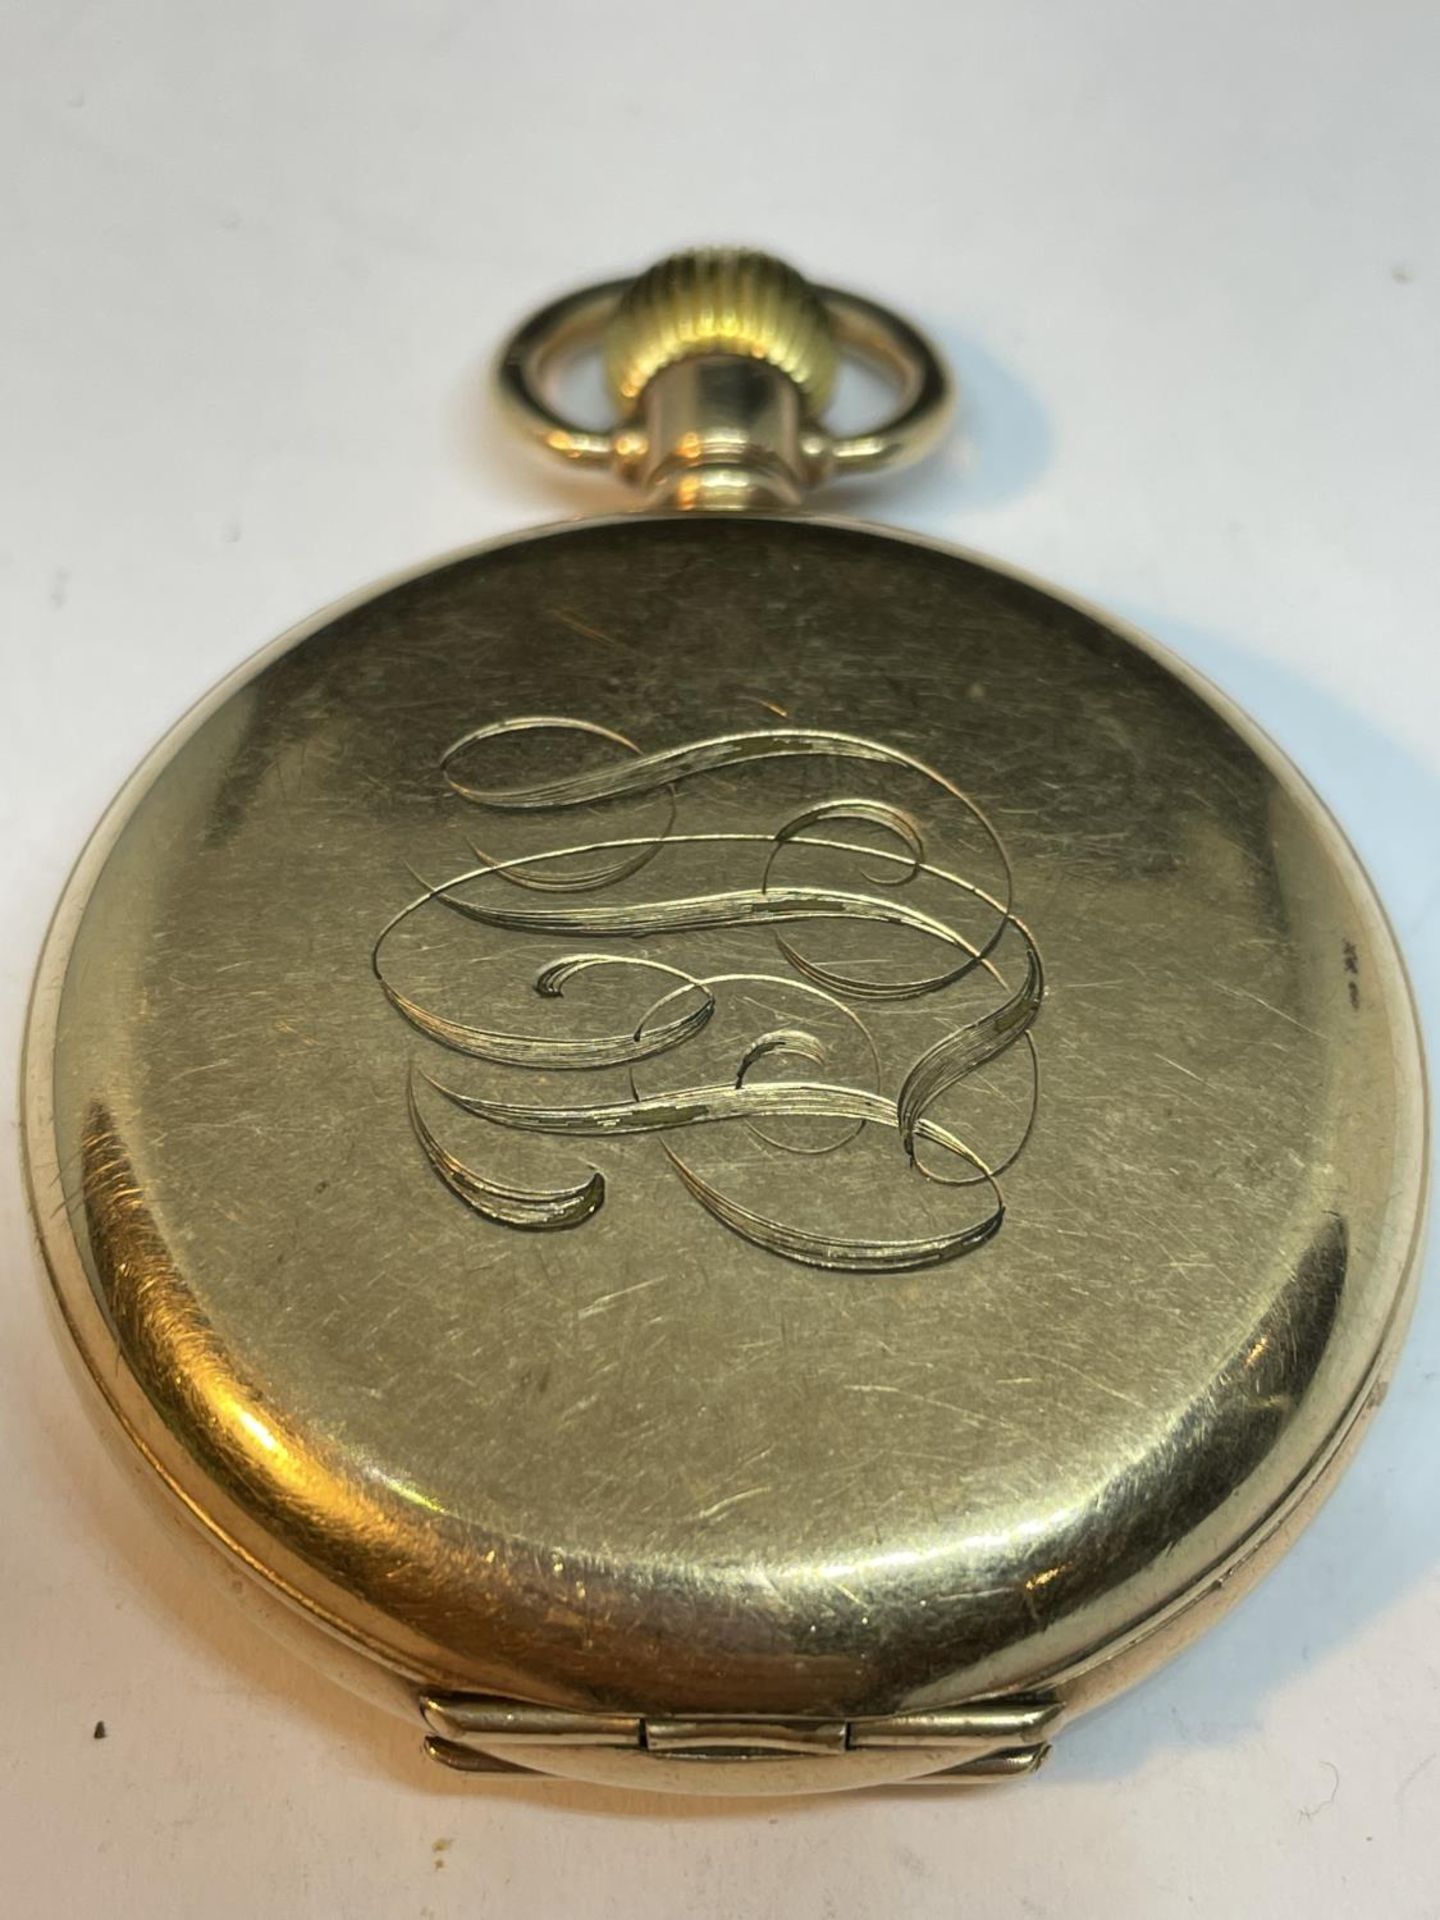 A GOLD PLATED ELGIN POCKET WATCH SEEN WORKING BUT NO WARRANTY - Image 2 of 5